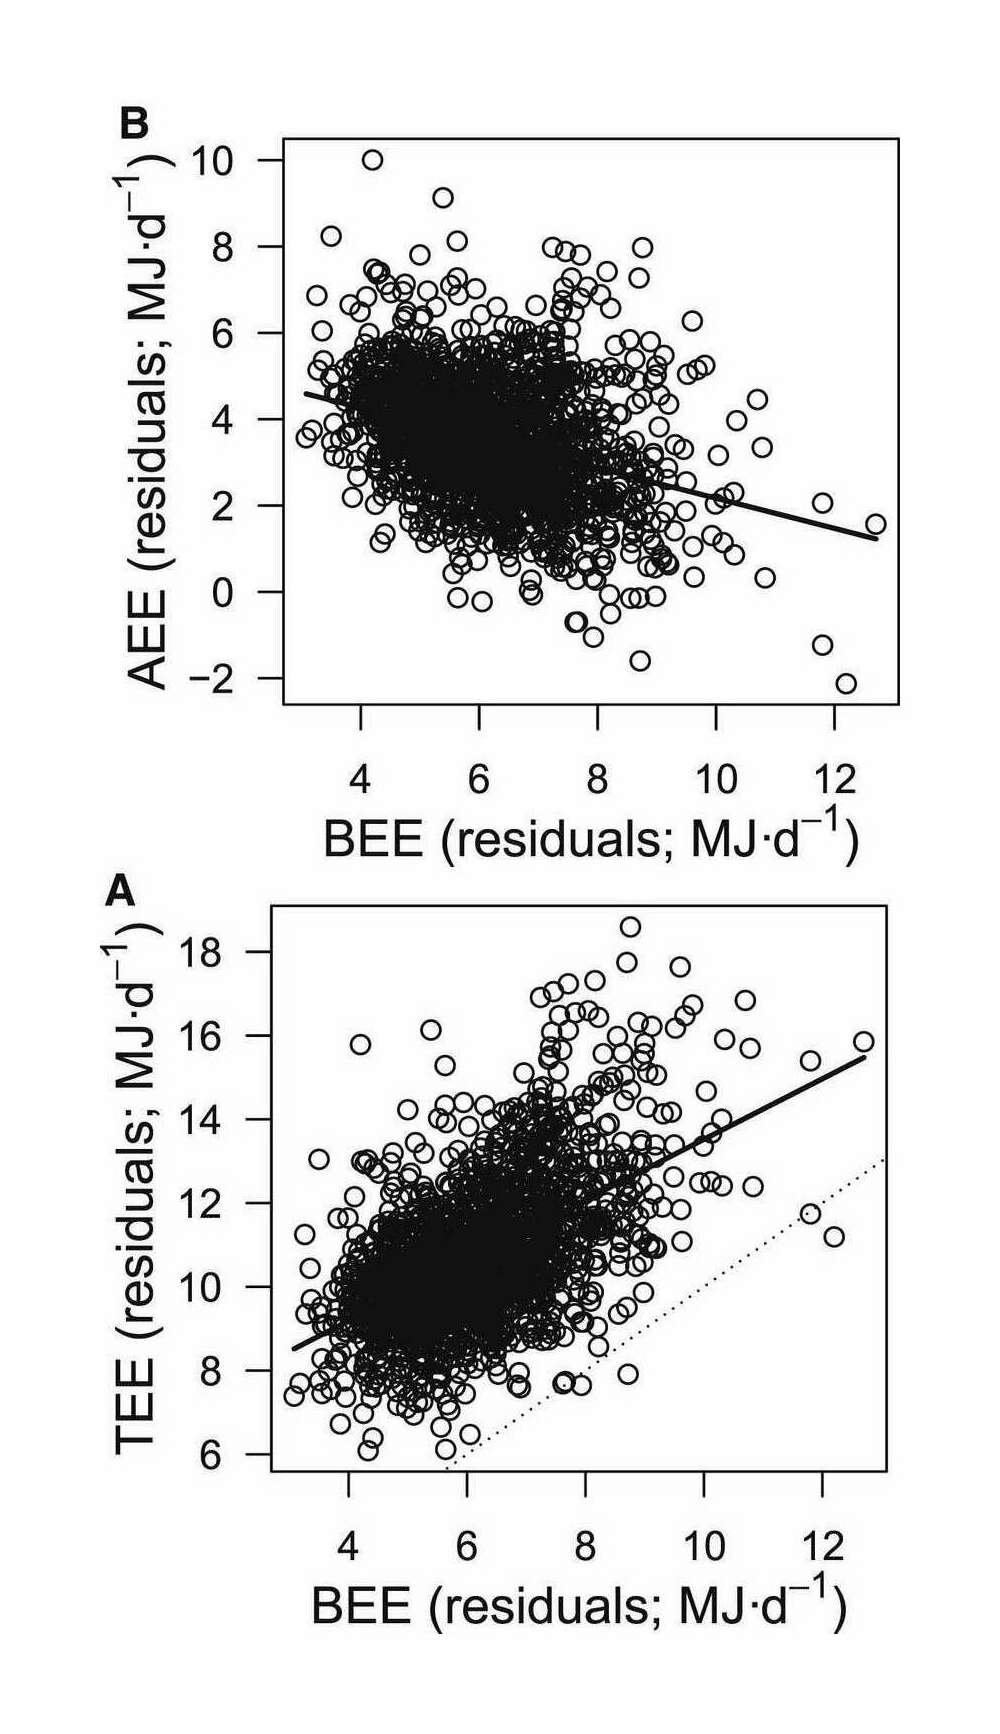 Figure 2: Energy compensation in humans. (A) Total energy expenditure (TEE; MJ∙d−1) and (B) activity energy expenditure (AEE; MJ∙d−1) as a function of basal energy expenditure (BEE; MJ∙d−1) in 1,754 subjects included in this study, controlling for sex, age, and body composition. (A) illustrates how the slope of the TEE-BEE relationship is <1 (compared to the 1:1 dotted line), whereas (B) illustrates the negative relationship between AEE and BEE.